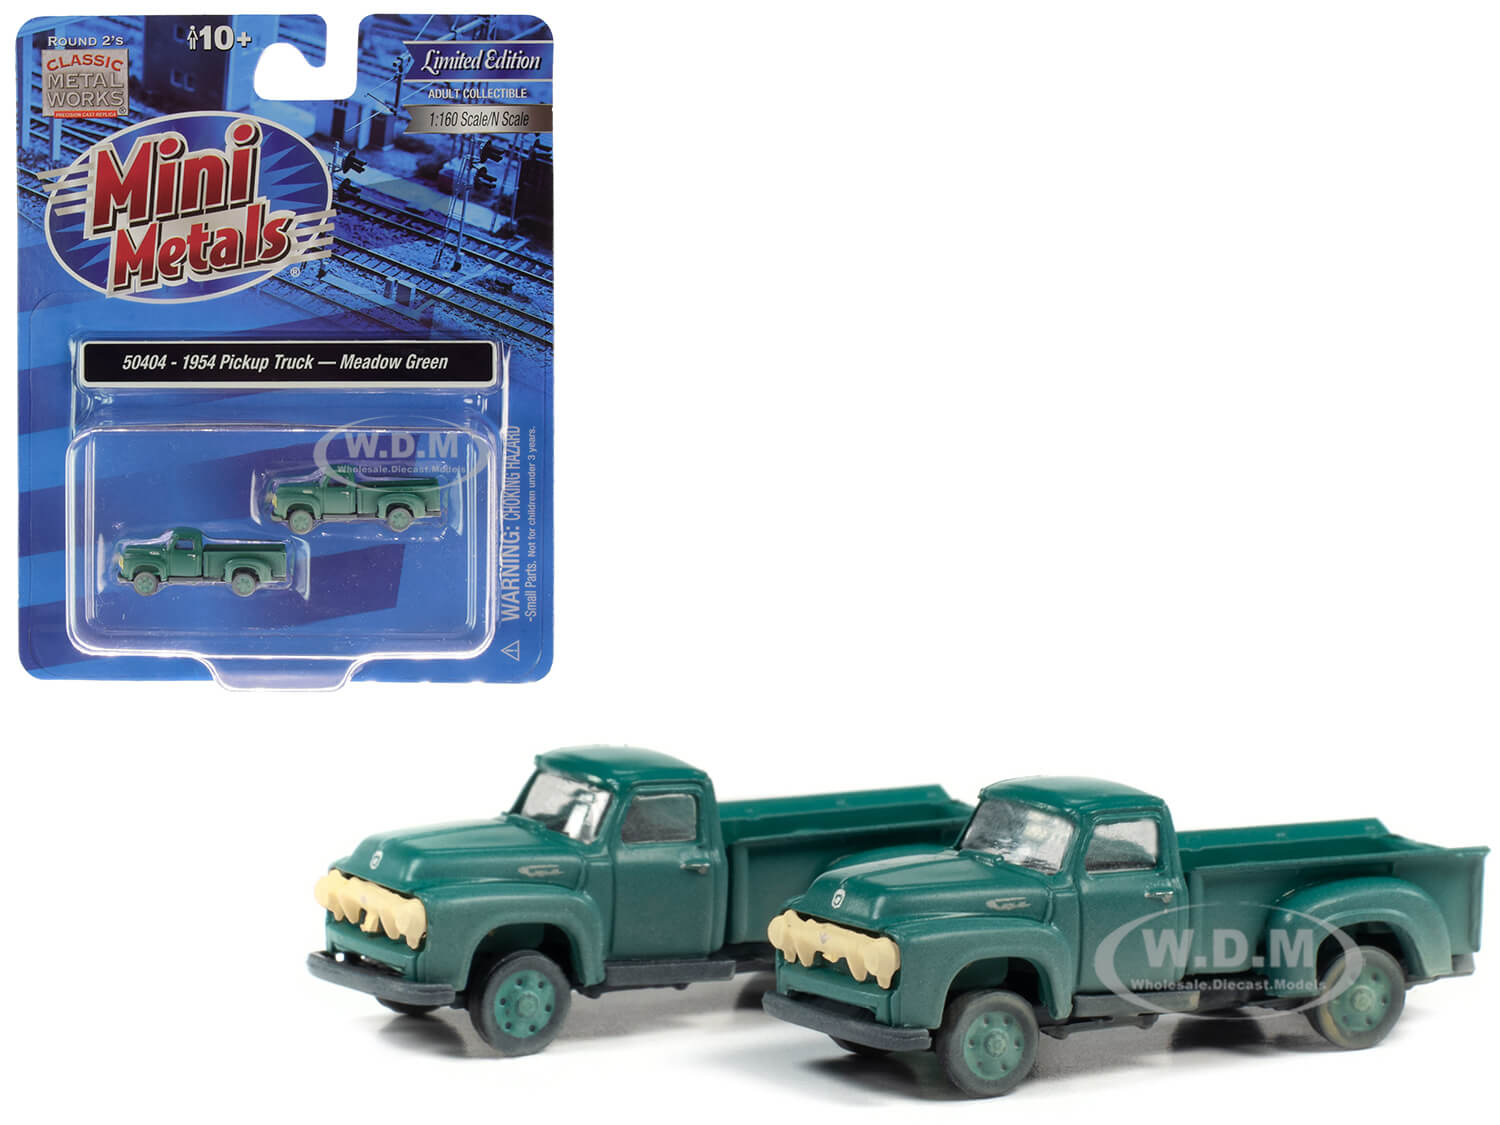 1954 Ford Pickup Trucks Meadow Green (dirty/weathered) Set Of 2 Pieces 1/160 (n) Scale Model Cars By Classic Metal Works